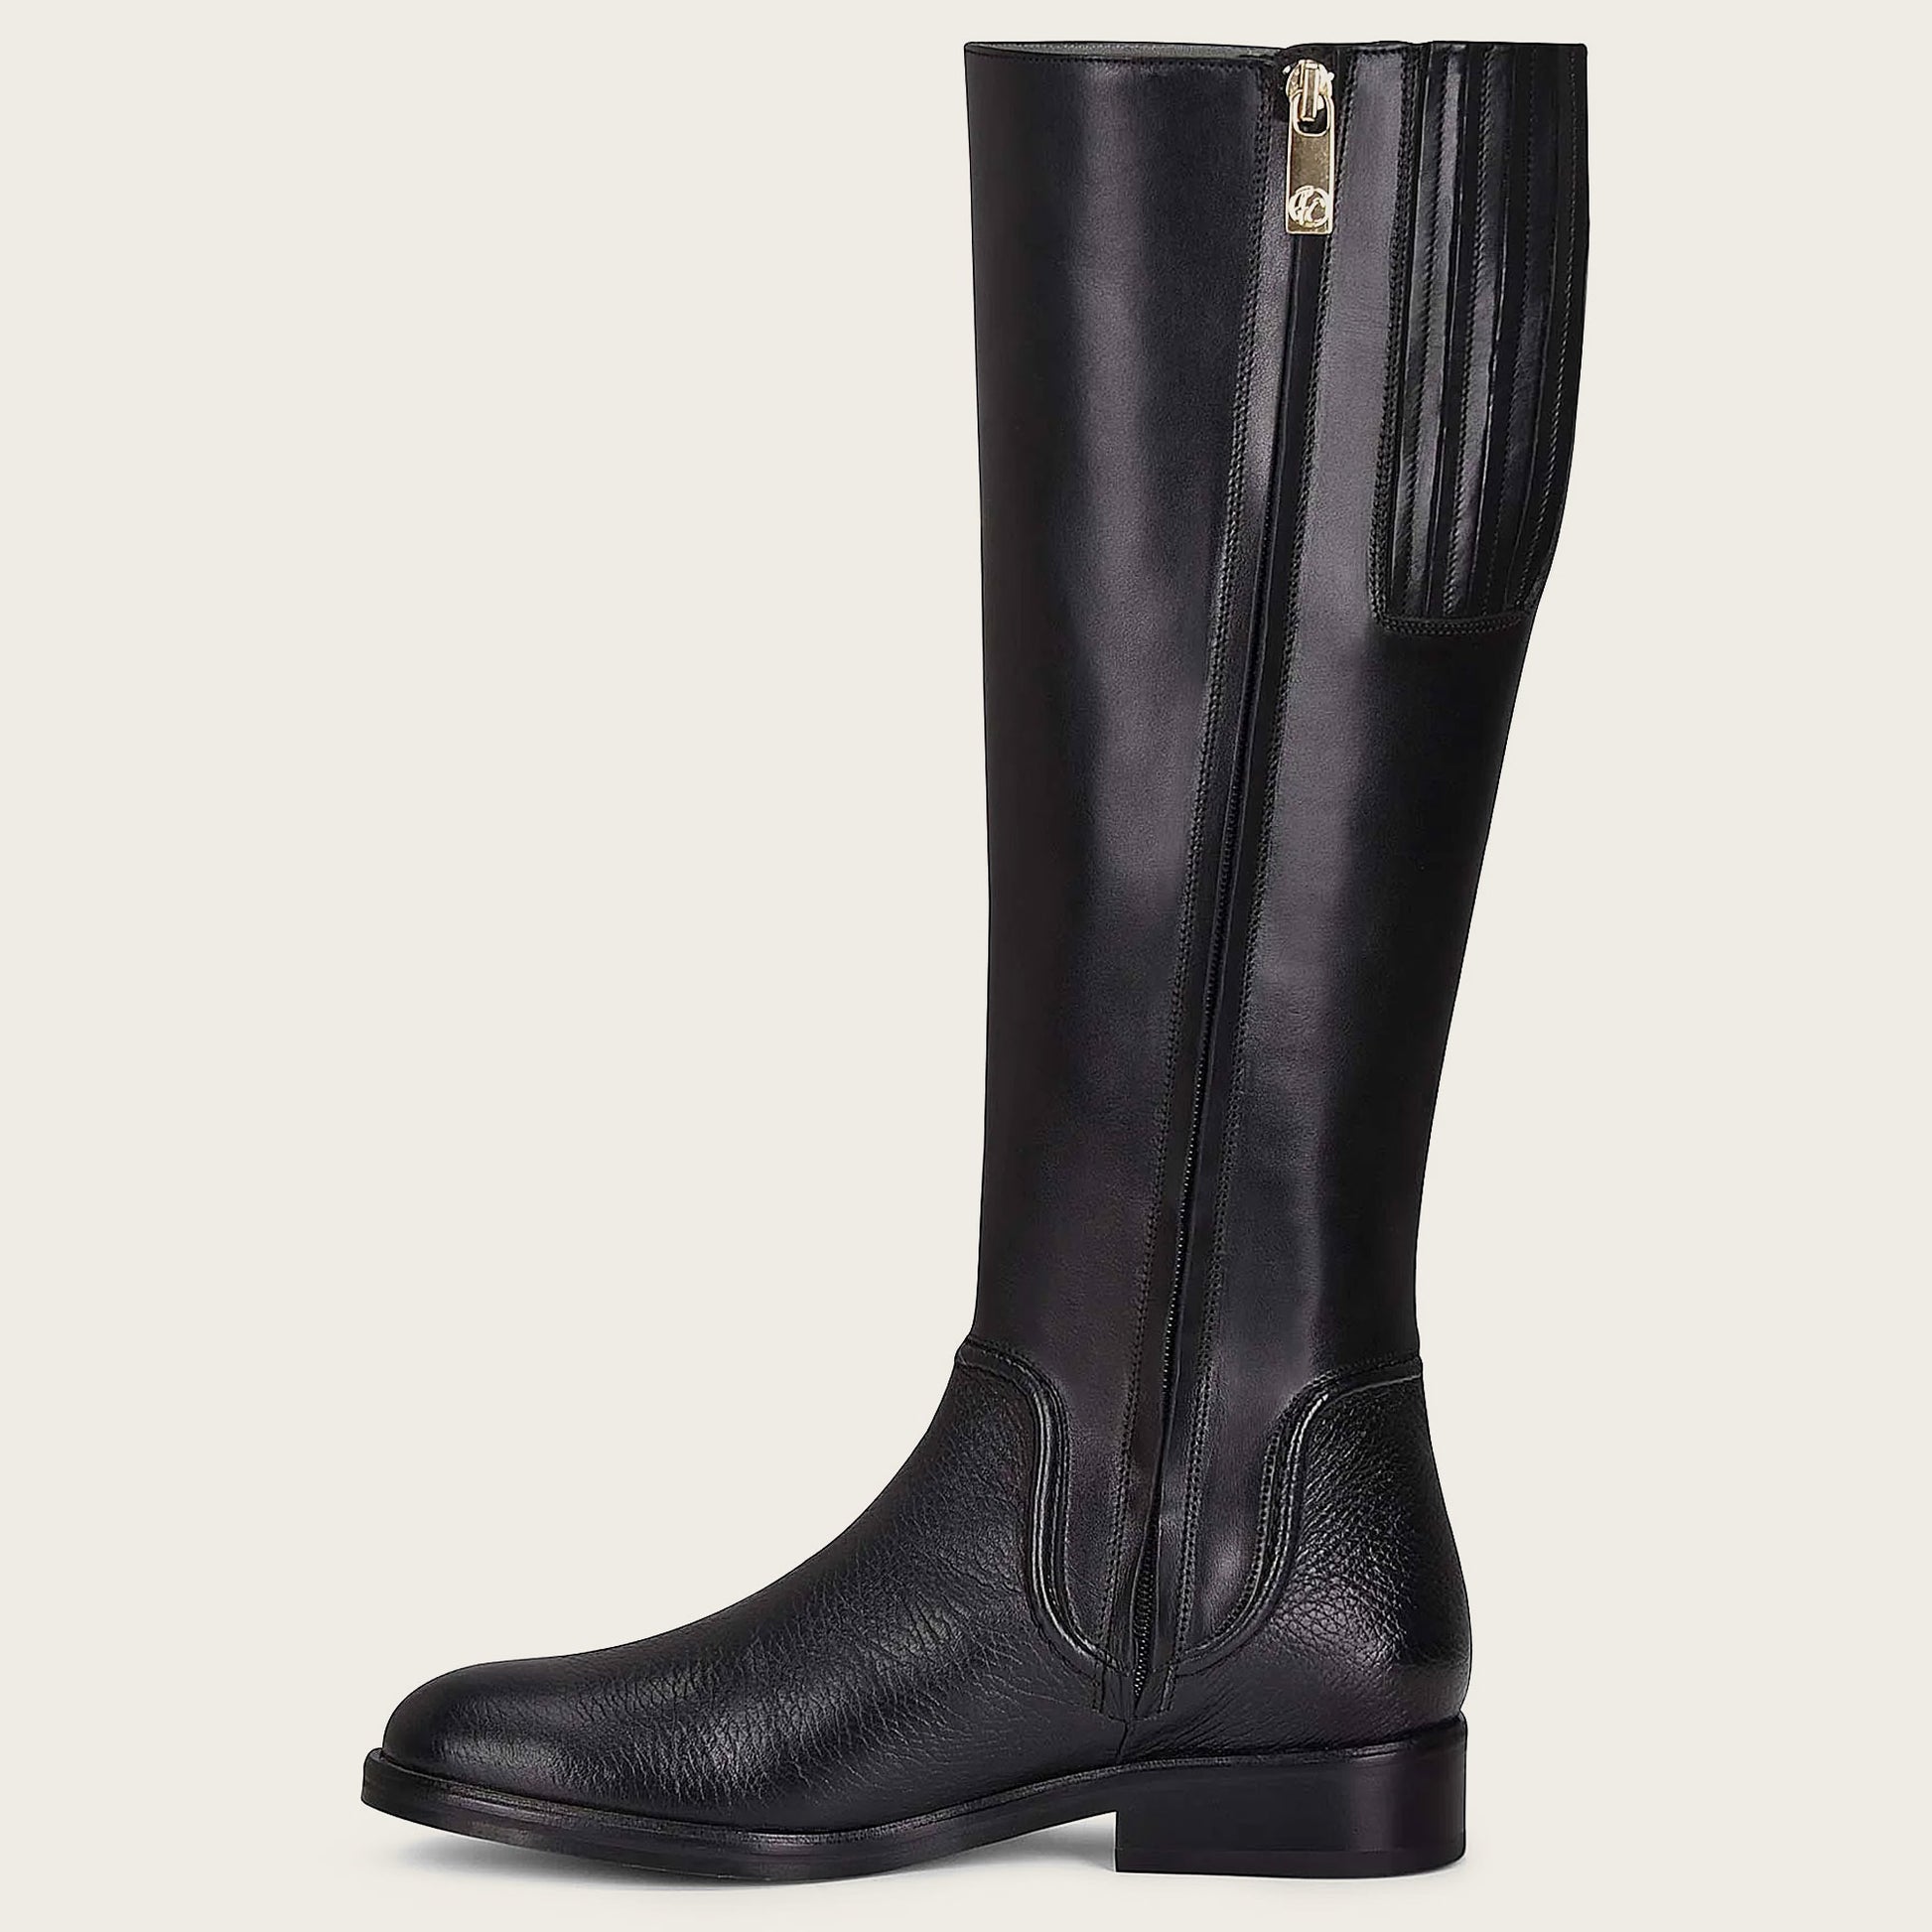 Experience the allure of hand-painted craftsmanship with this exquisite black leather riding boot.